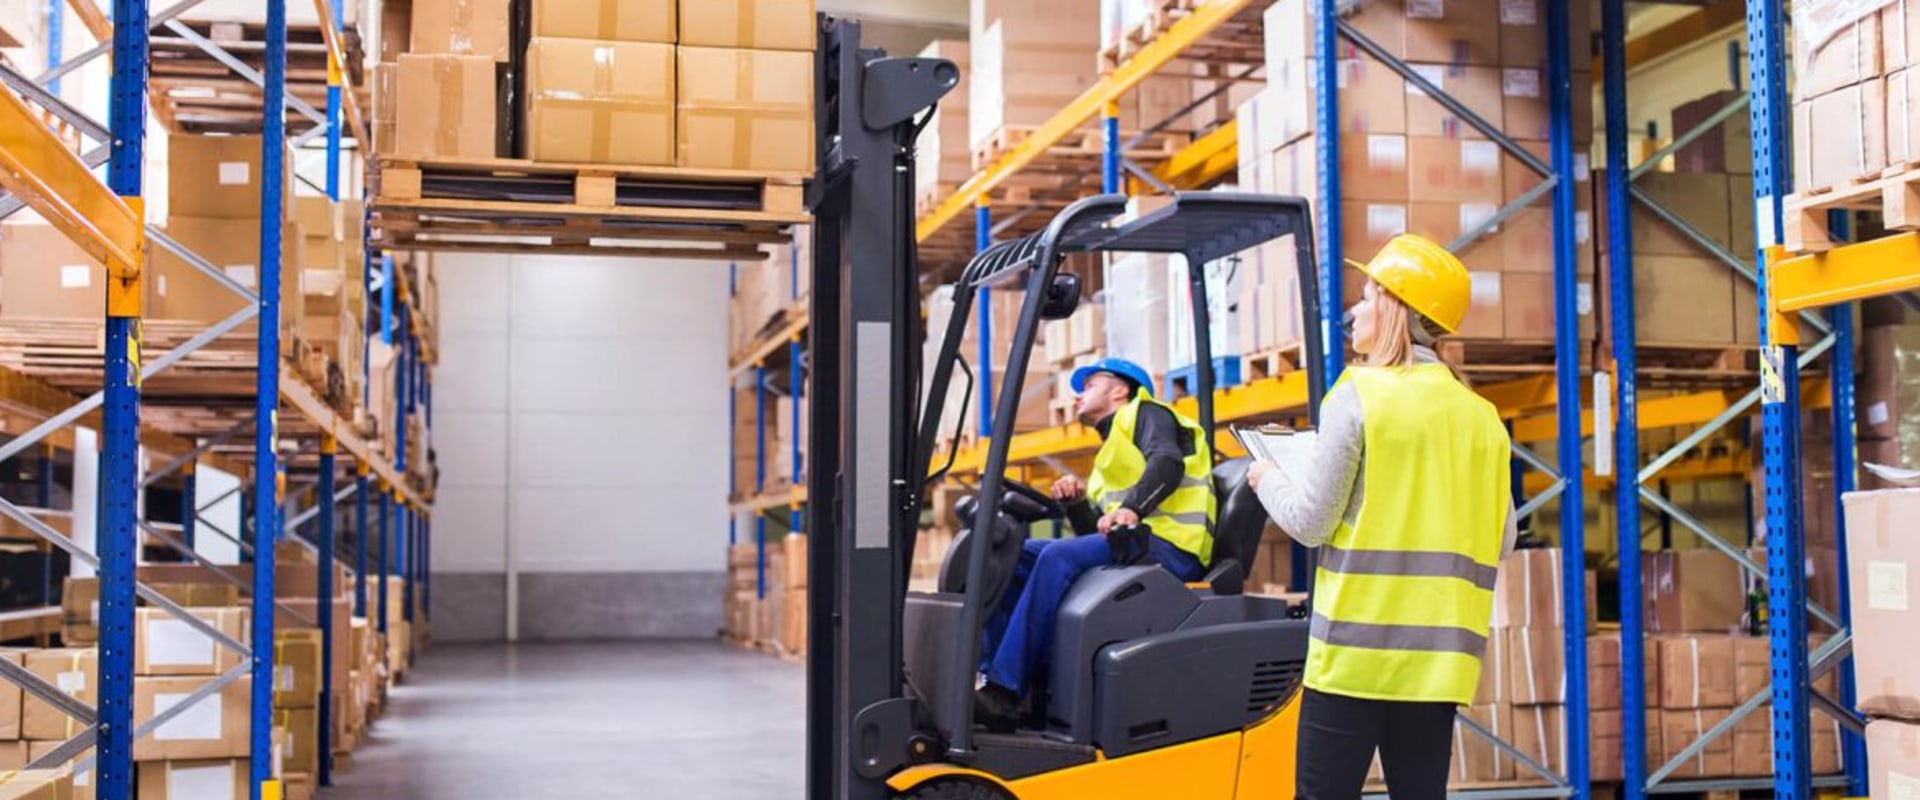 What are the functions of material handling system?